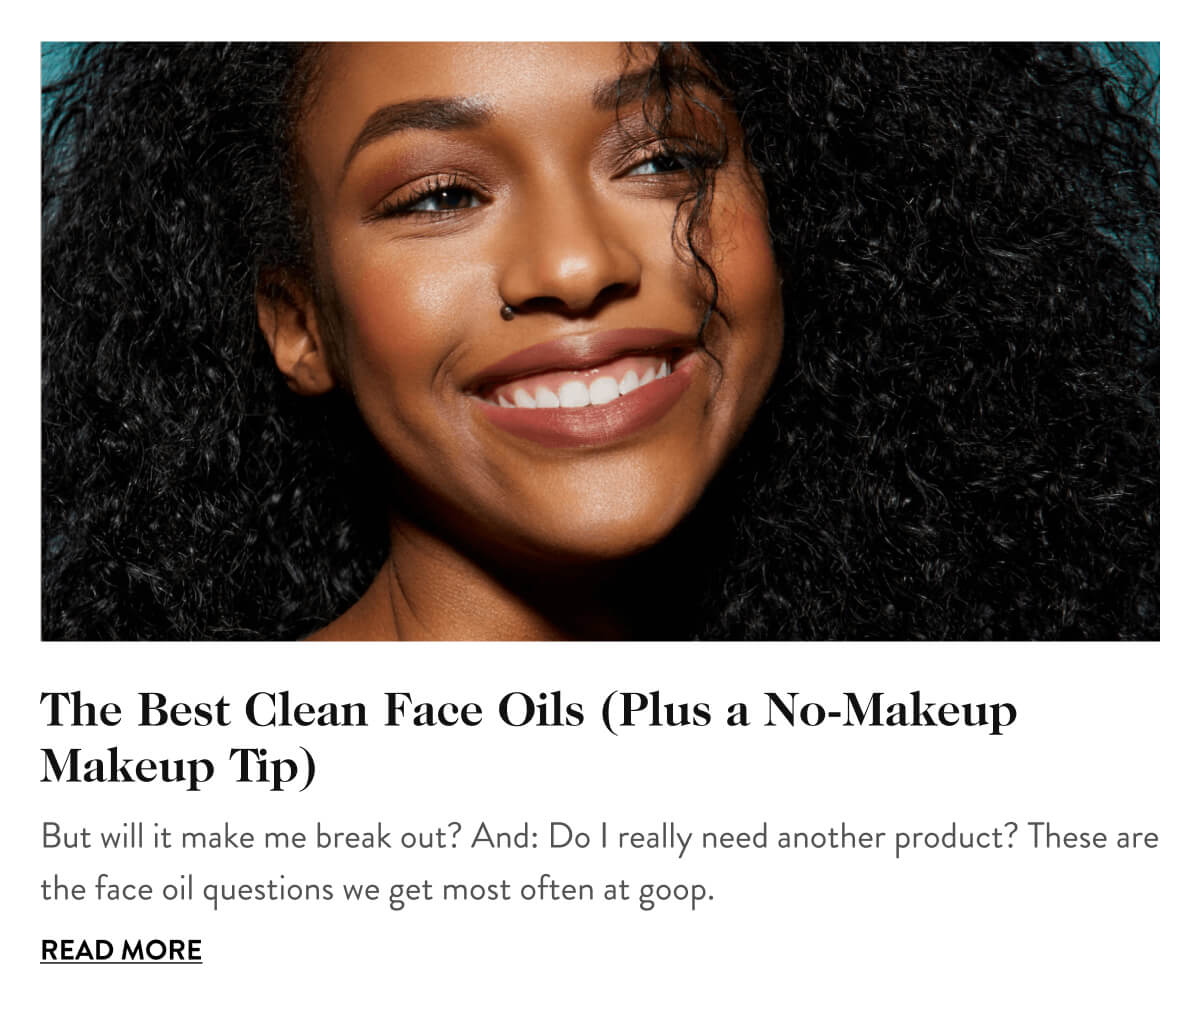 The Best Clean Face Oils (Plus a No-Makeup Makeup Tip) But will it make me break out? And: Do I really need another product? These are the face oil questions we get most often at goop. Read More